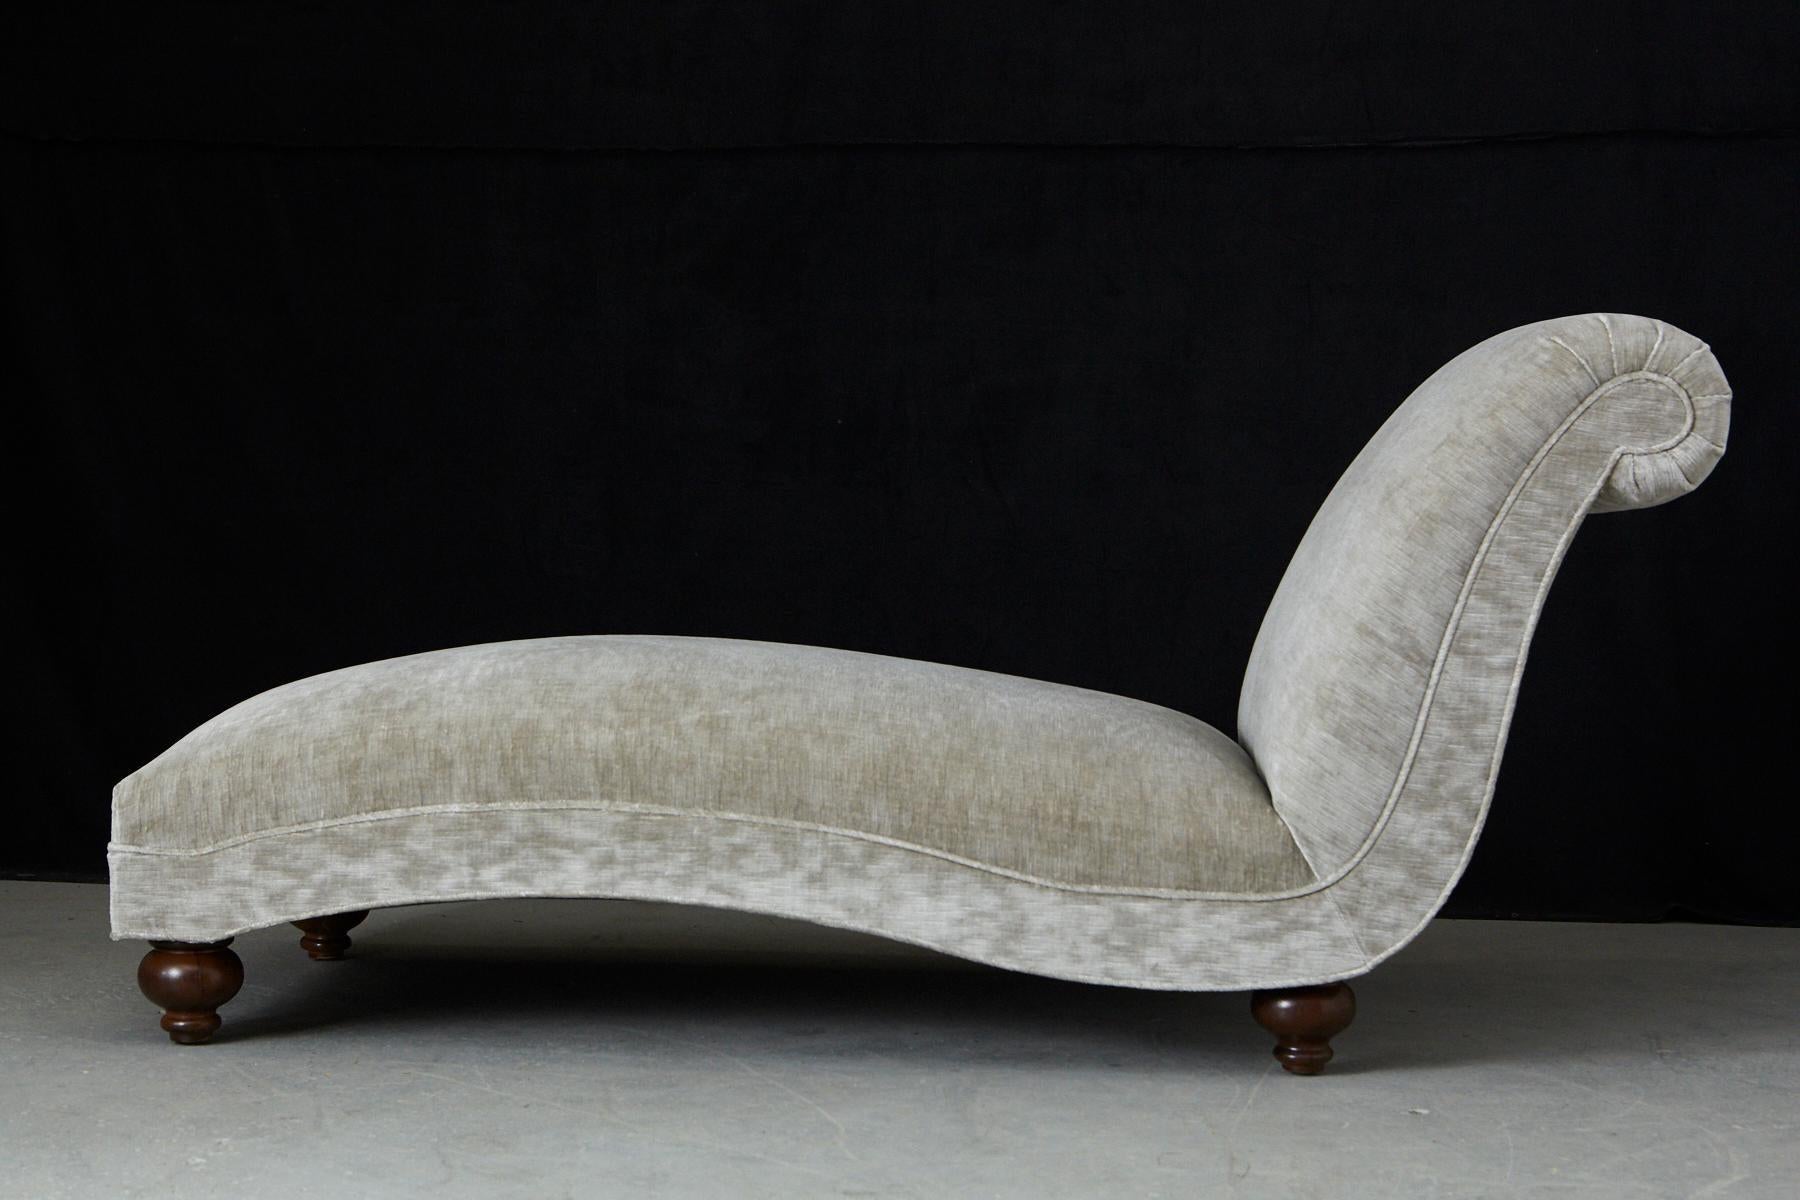 Gorgeous 1930s French chaise longue with a puristic design and a lovely curved shape and mounted on ball feet. The piece has been newly upholstery in a beige stria velvet. A very comfortable and great statement piece.